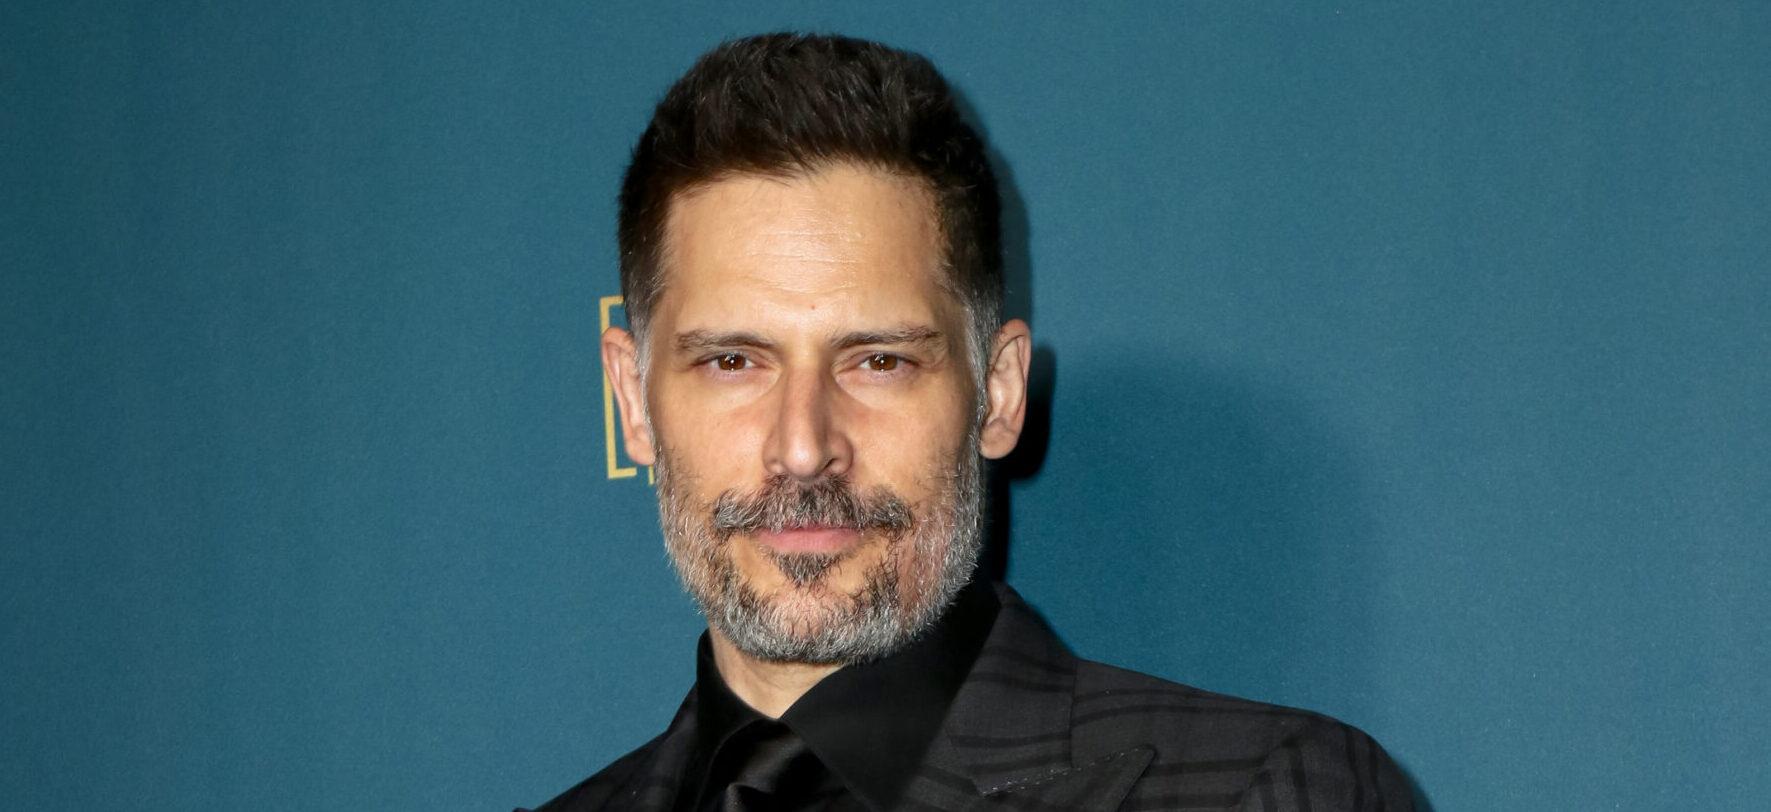 Joe Manganiello’s ‘Deal Or No Deal’ Hosting Gig Receives Backlash: ‘You’ll Never Be Howie’